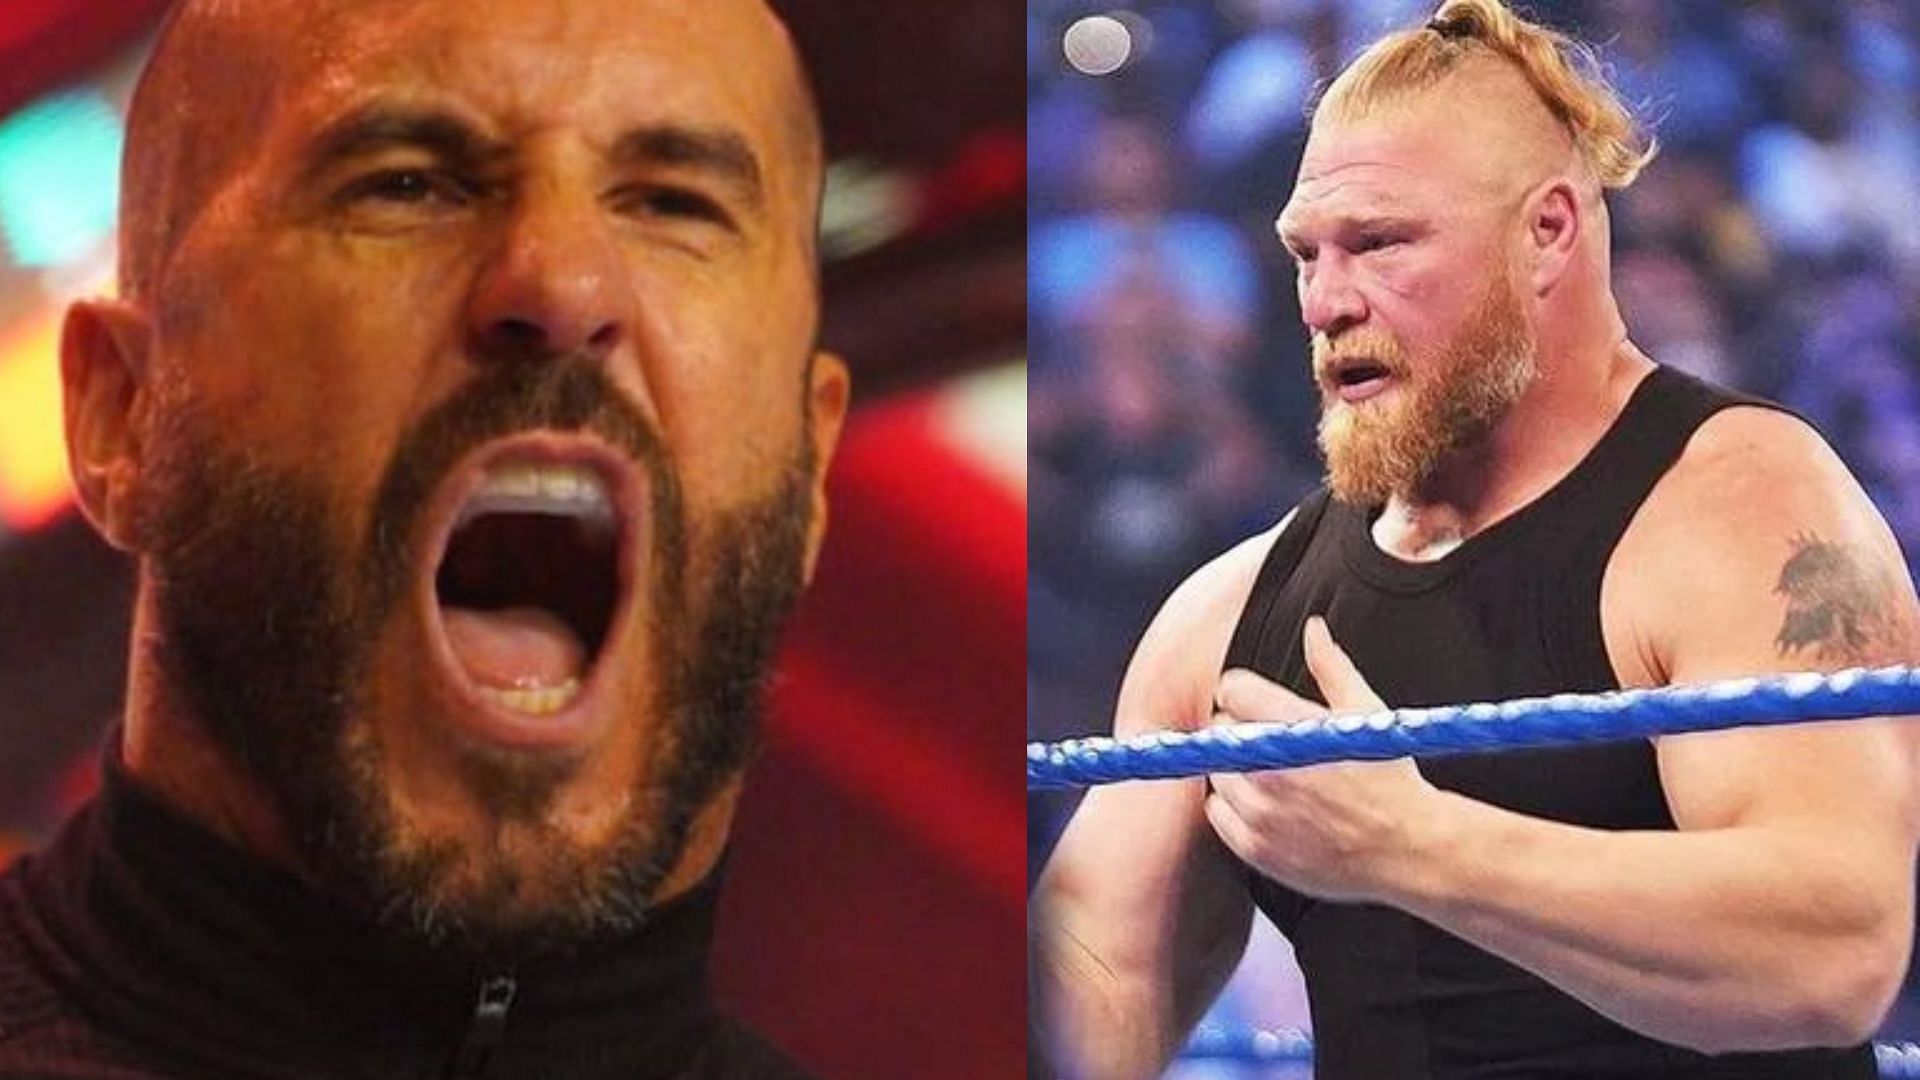 WWE Superstars like Cesaro and Brock Lesnar could thrive in NXT